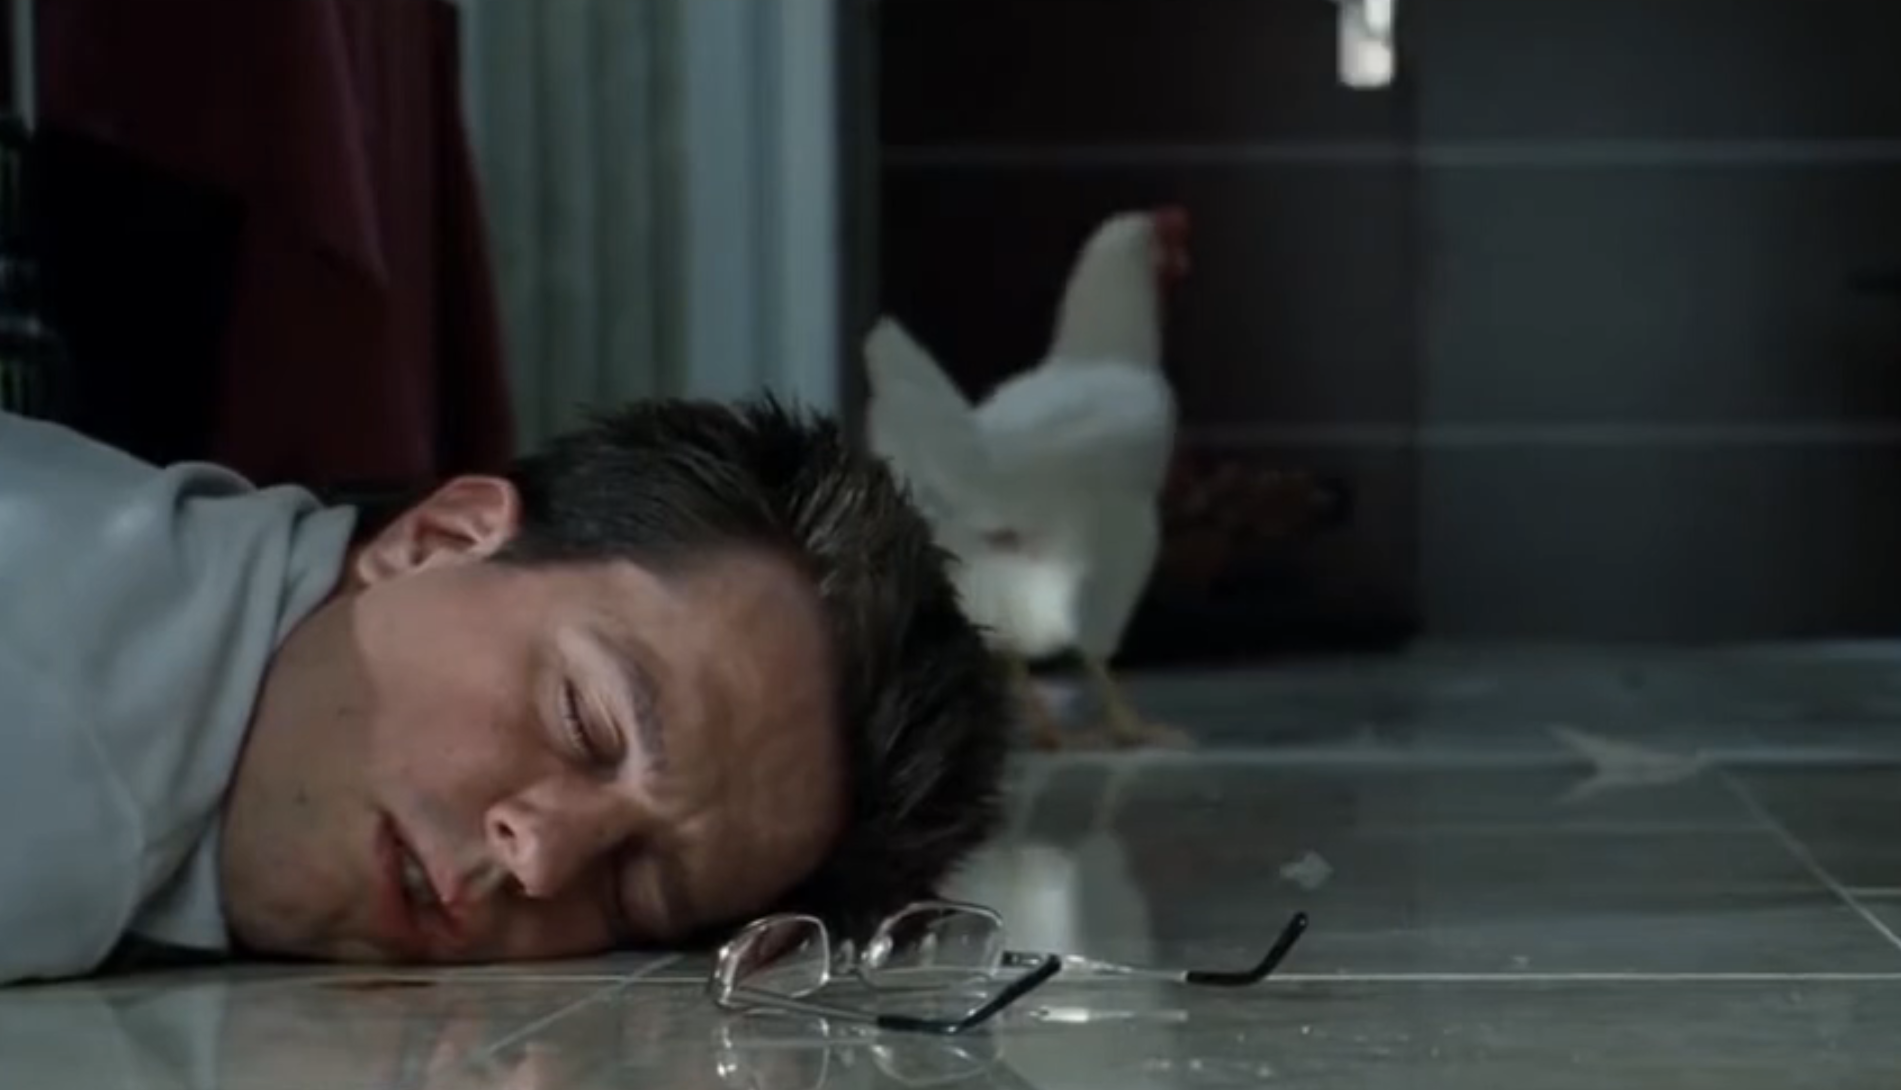 From &quot;The Hangover&quot;: A man is asleep on the floor with his glasses next to him and a random chicken behind him